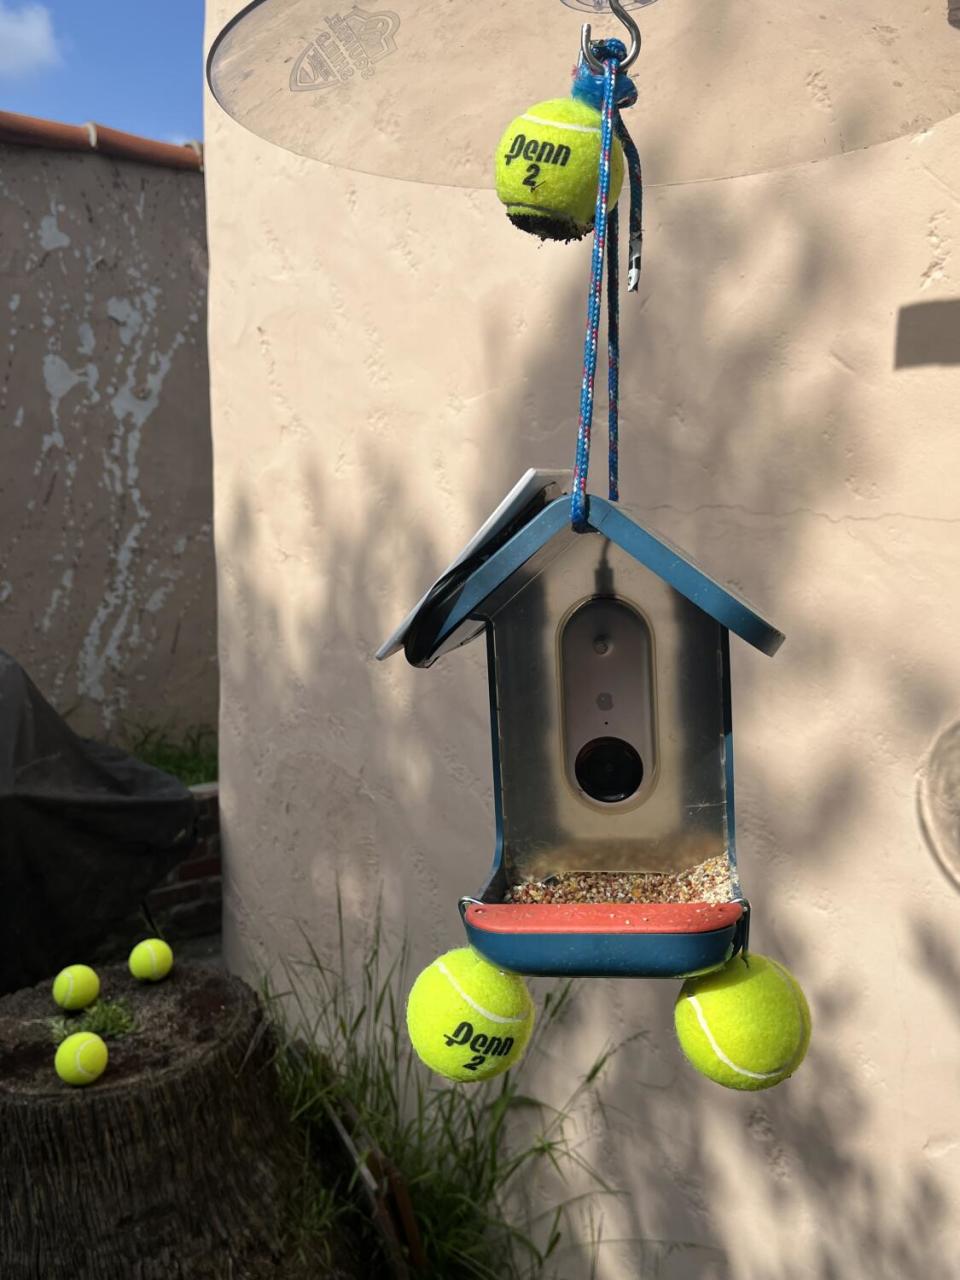 Bright yellow tennis balls hang from a bird feeder and lie on the ground below it